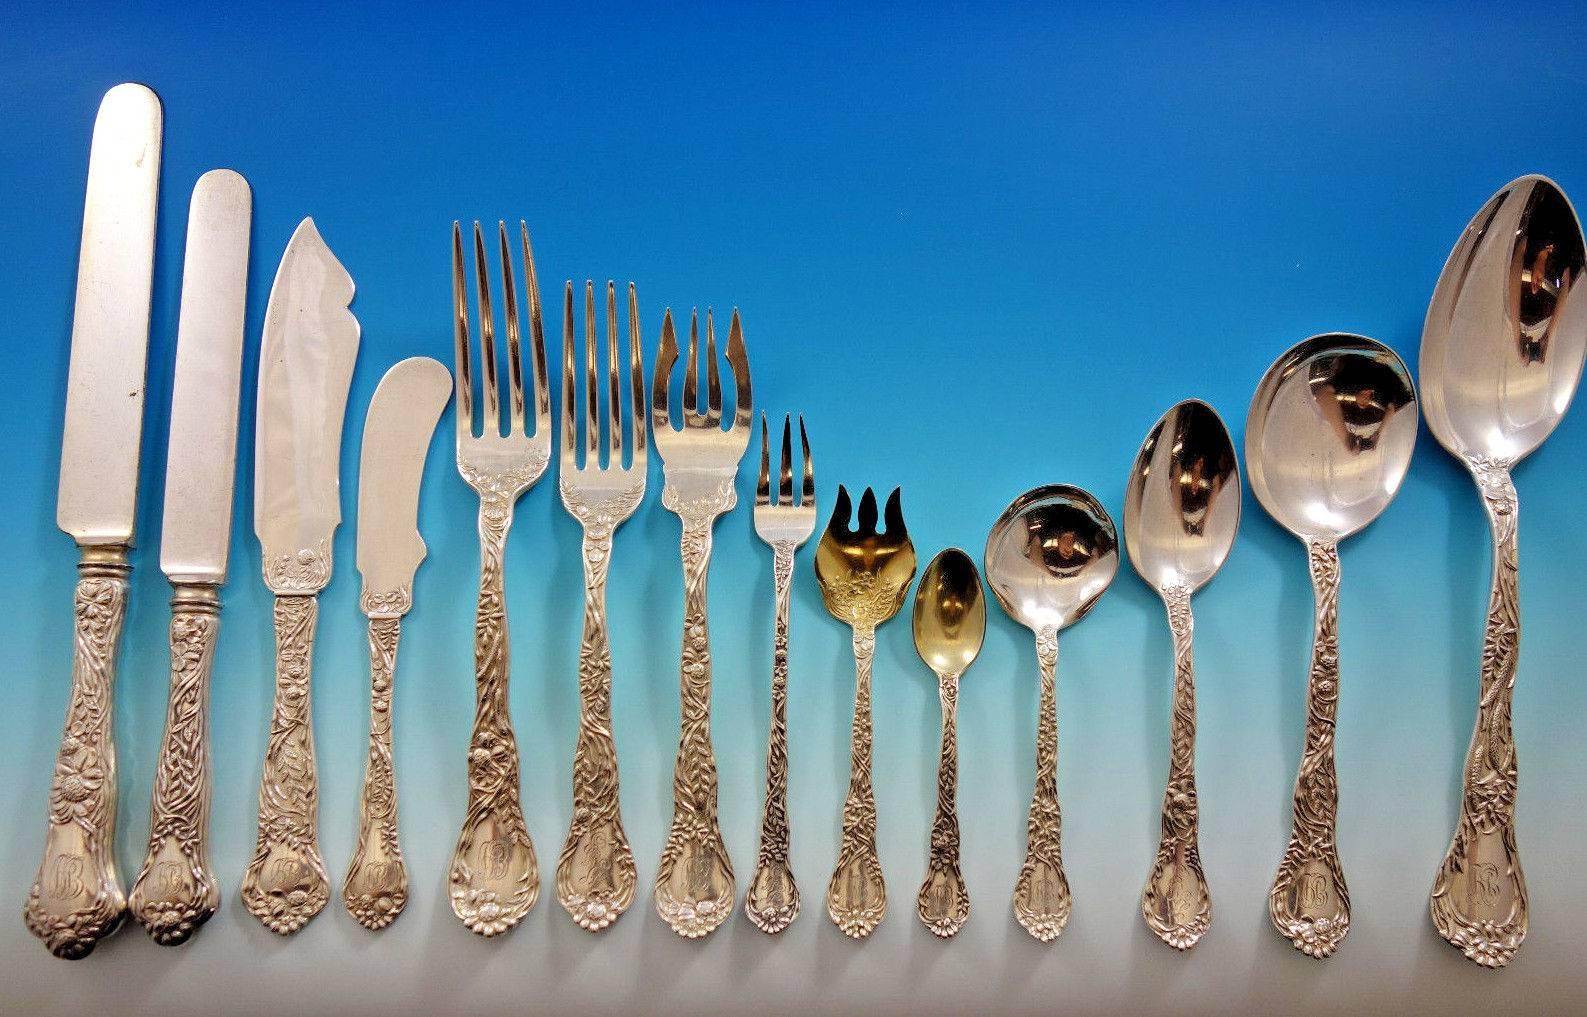 Exceptional Meadow by Gorham sterling silver flatware set, 180 pieces. This set includes:
 
12 dinner knives, 9 5/8